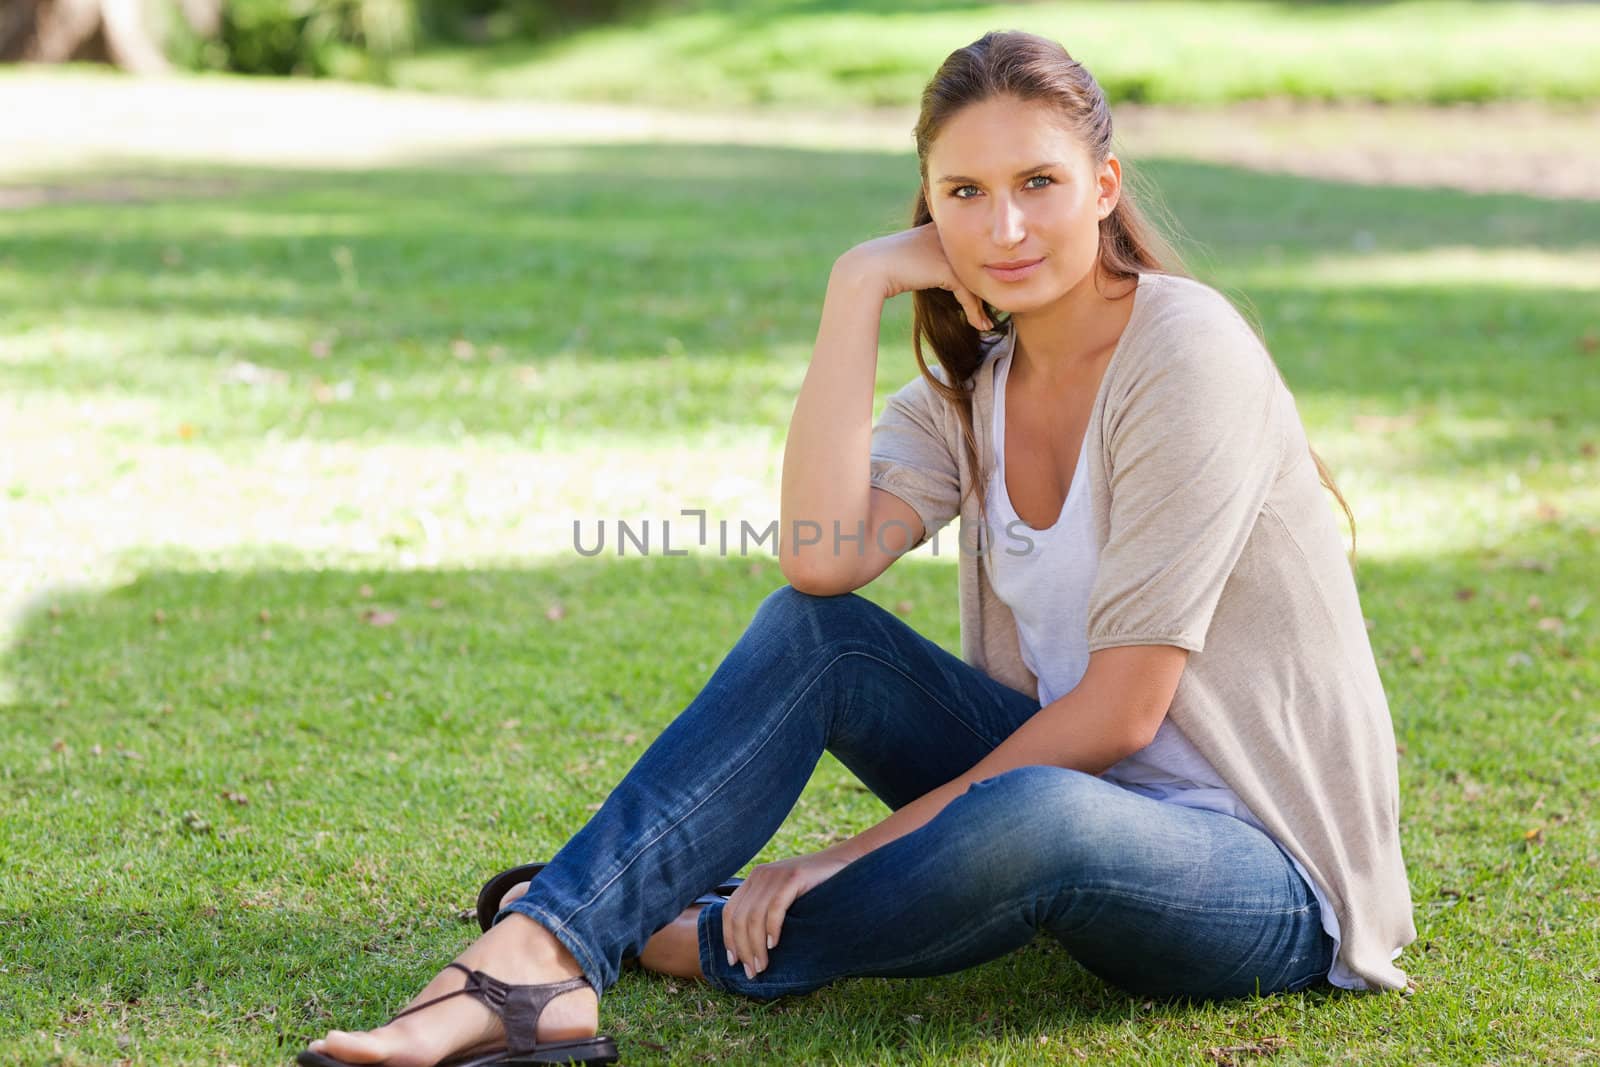 Relaxed woman enjoying her day in the park by Wavebreakmedia